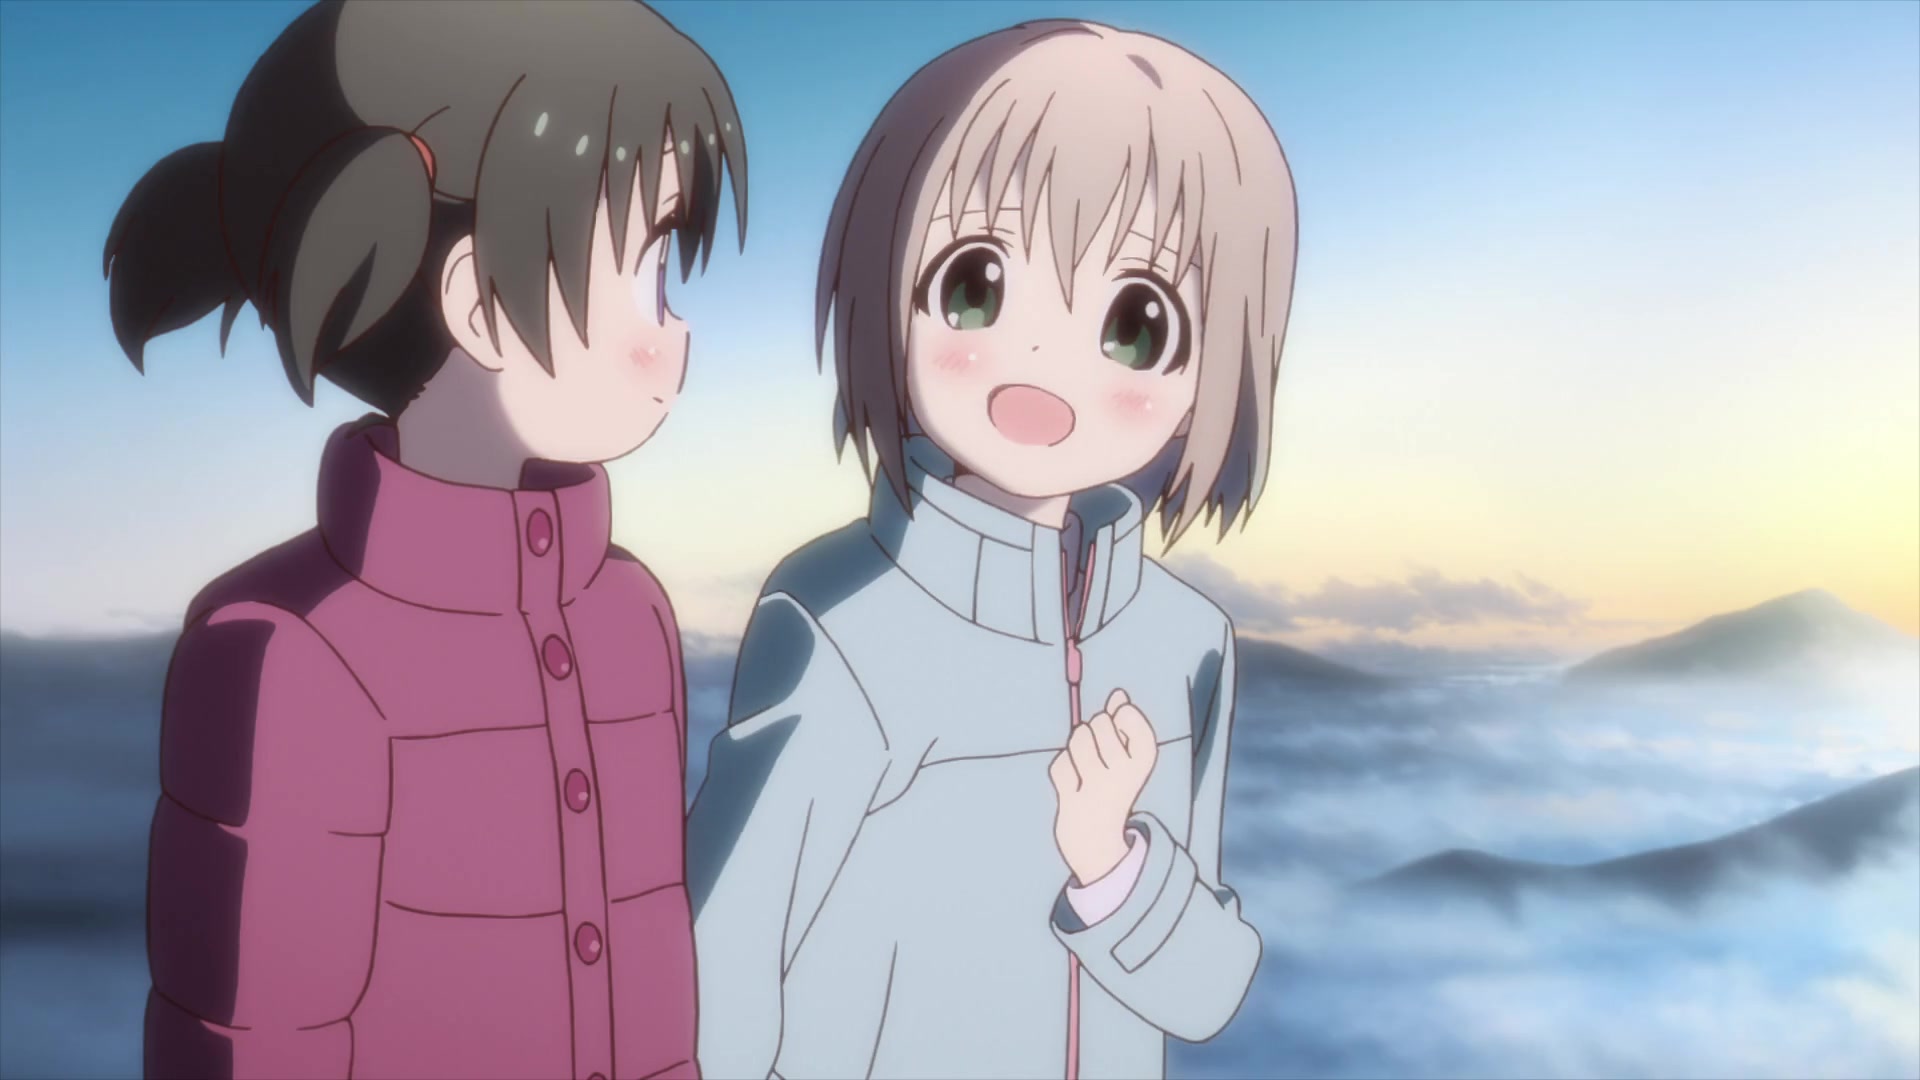 Aoi and Hinata during their first mountaineering adventure to Mount Tanigawa